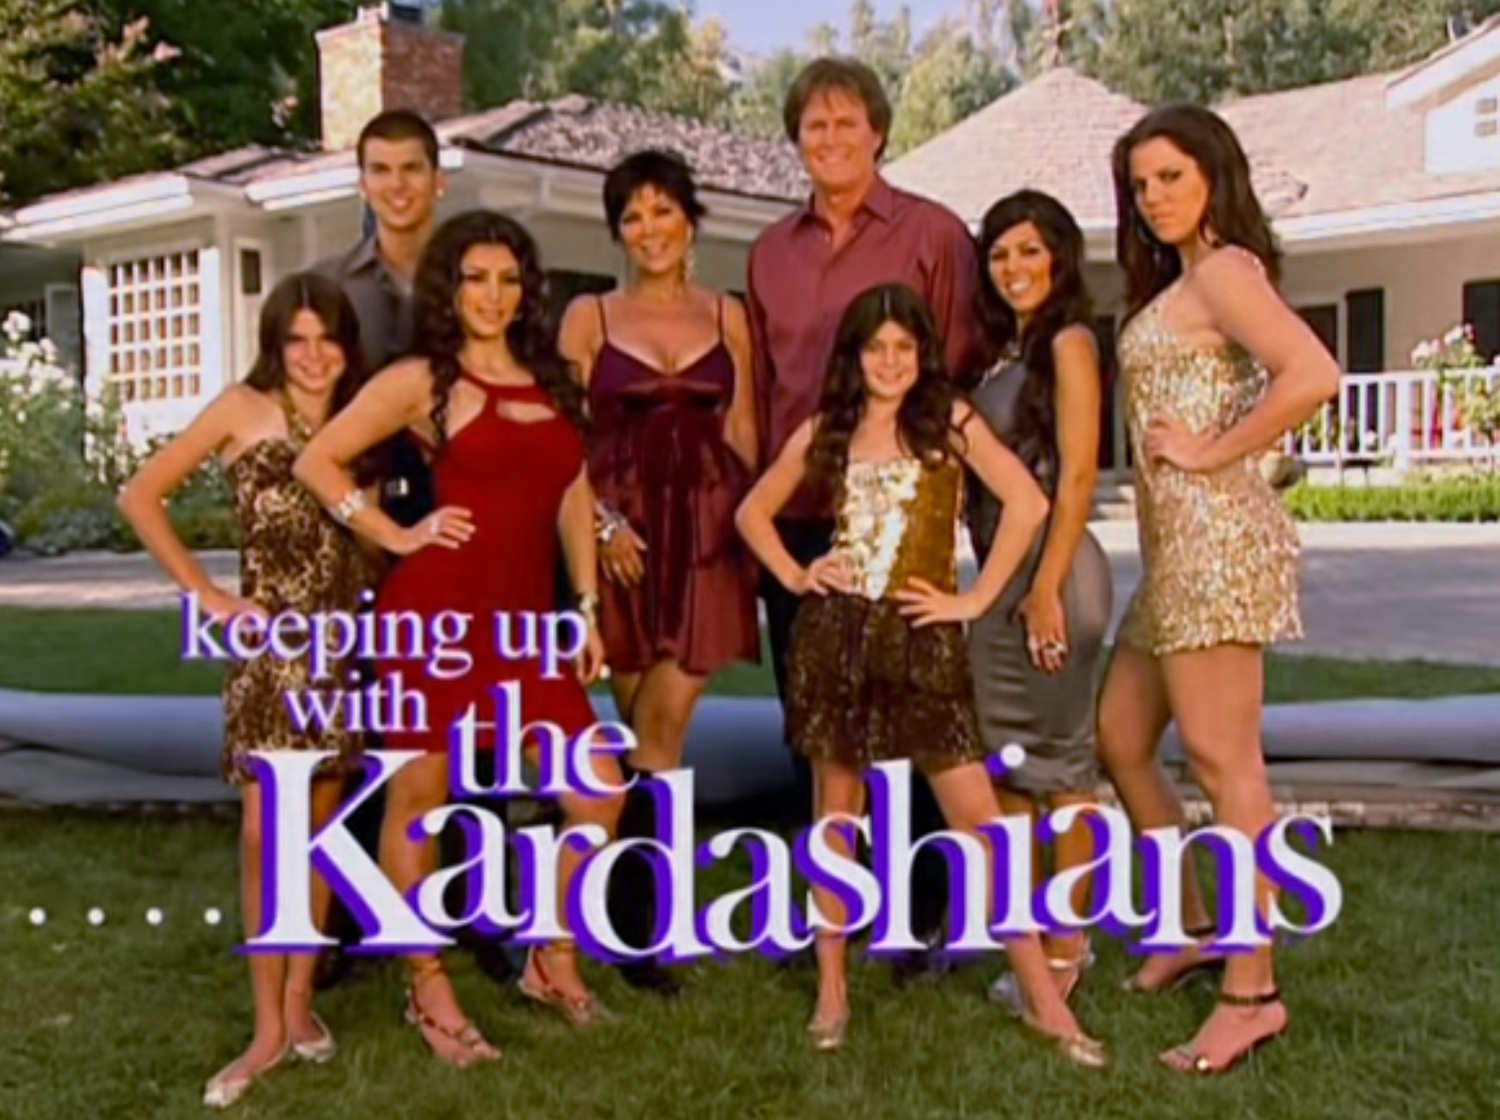 HQ Keeping Up With The Kardashians Wallpapers | File 159.63Kb